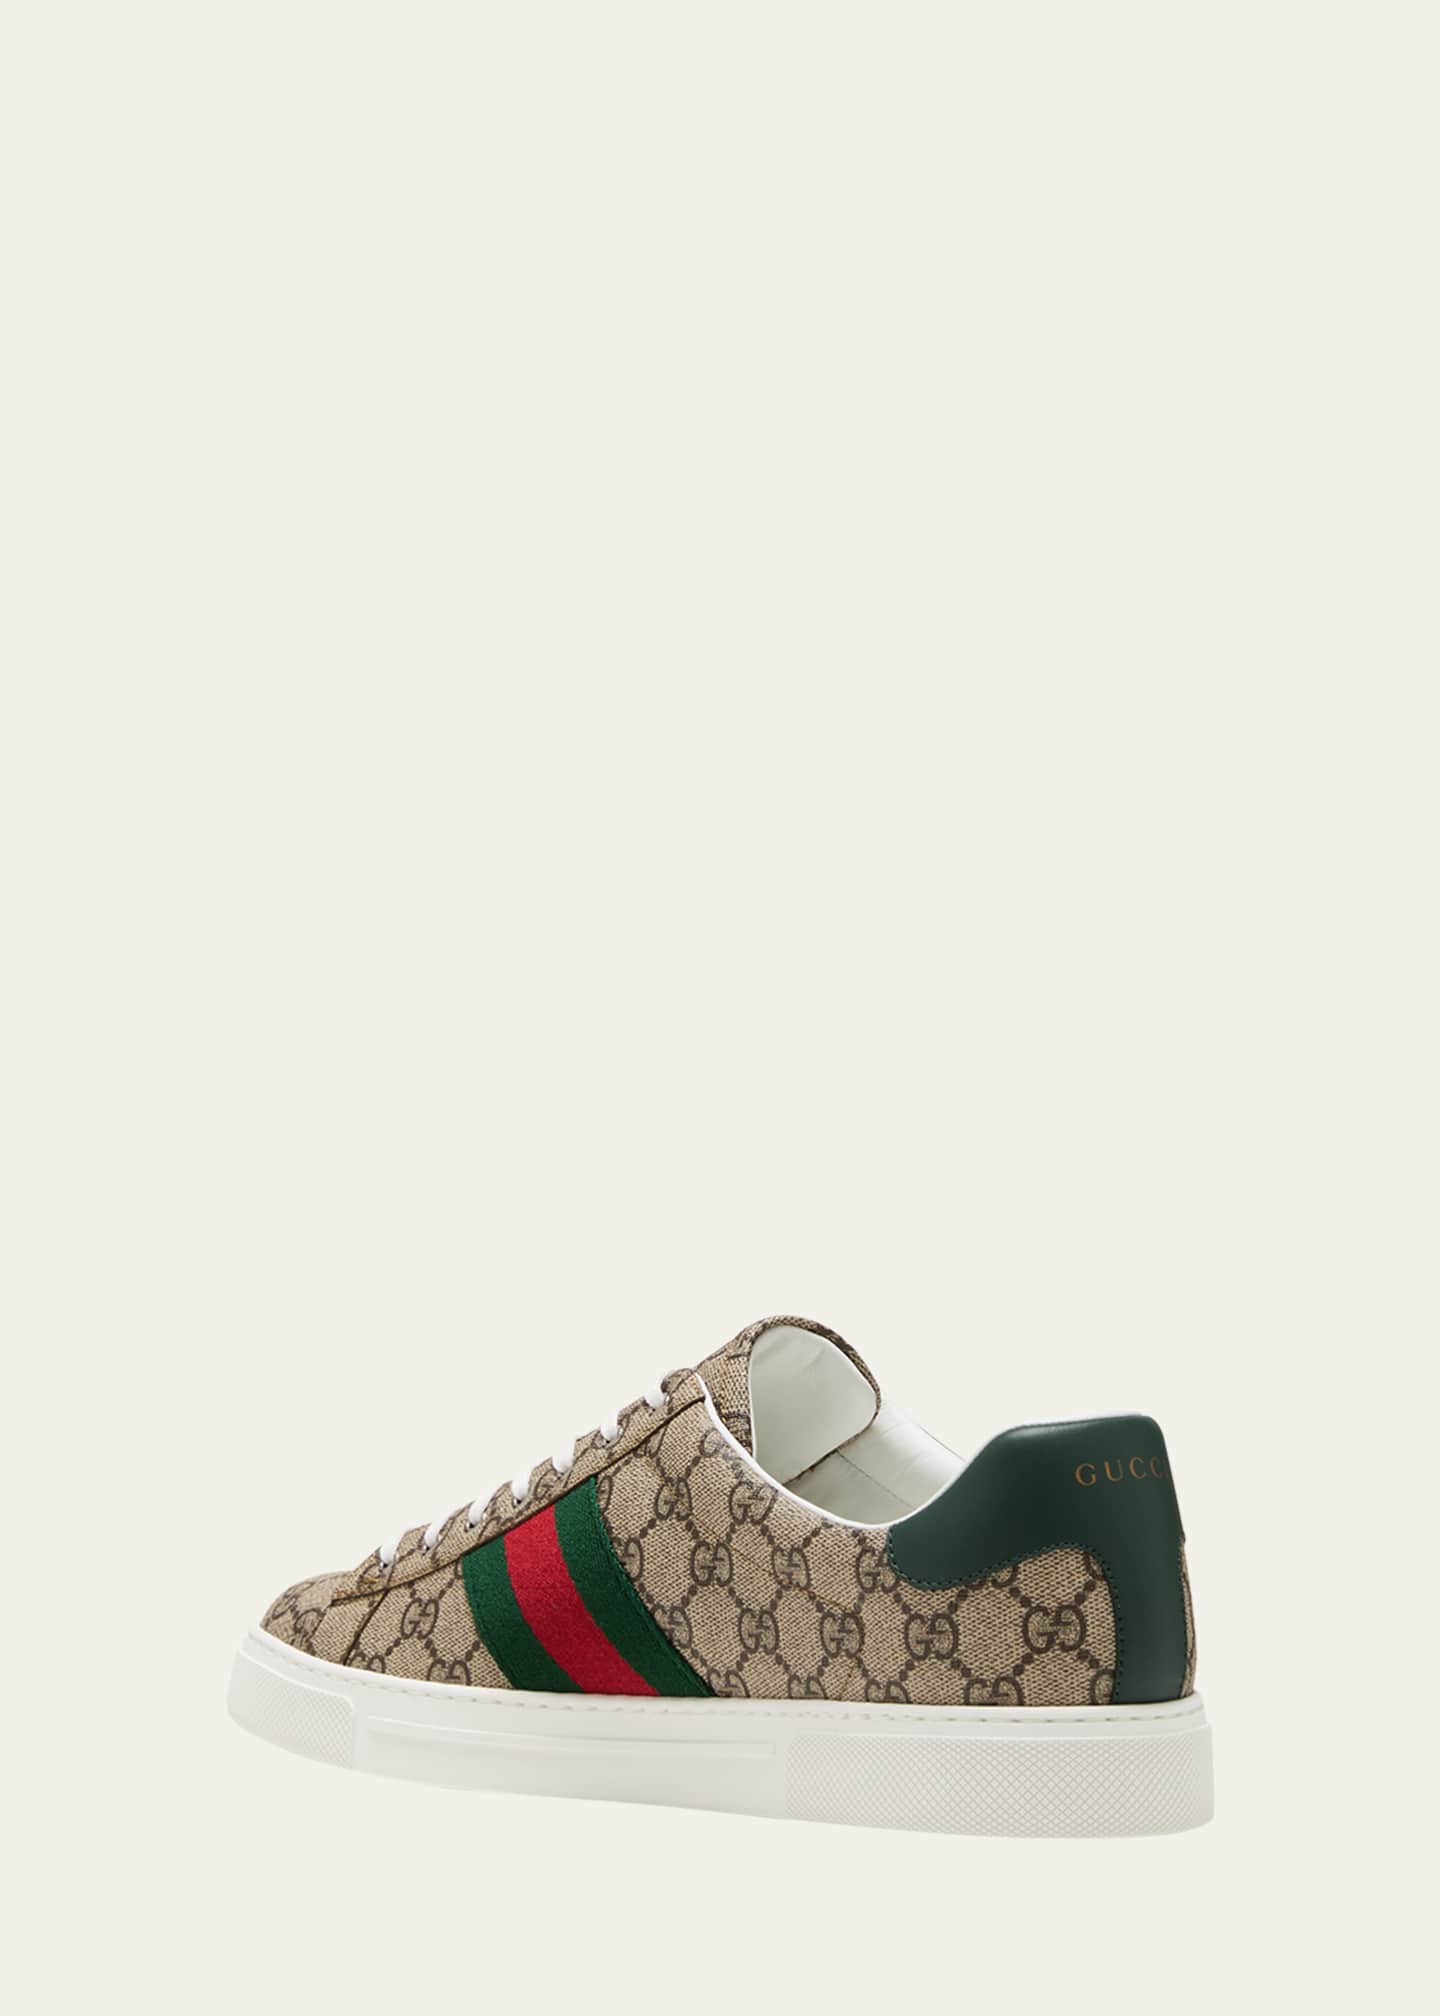 Gucci Men's Gucci Ace Low-Top Sneakers with Web - Bergdorf Goodman